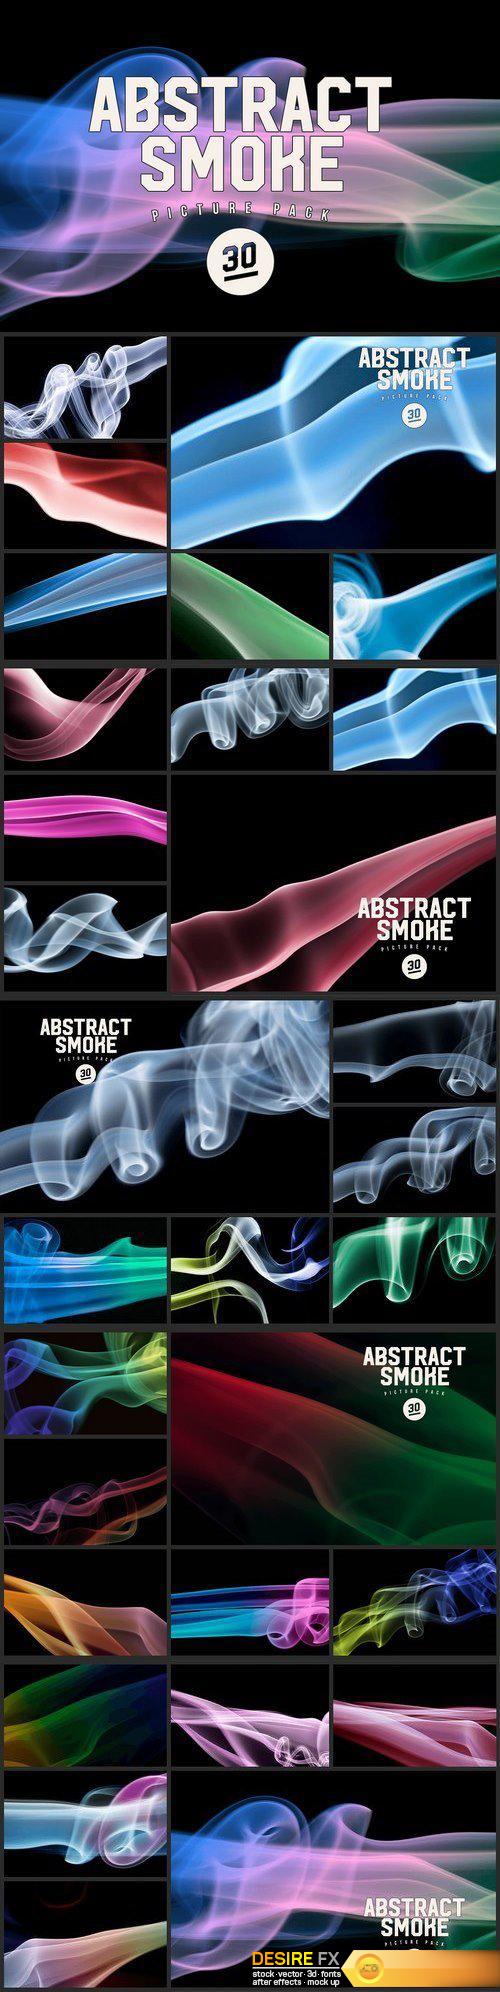 CM - Abstract Smoke Photo Pack 1376734